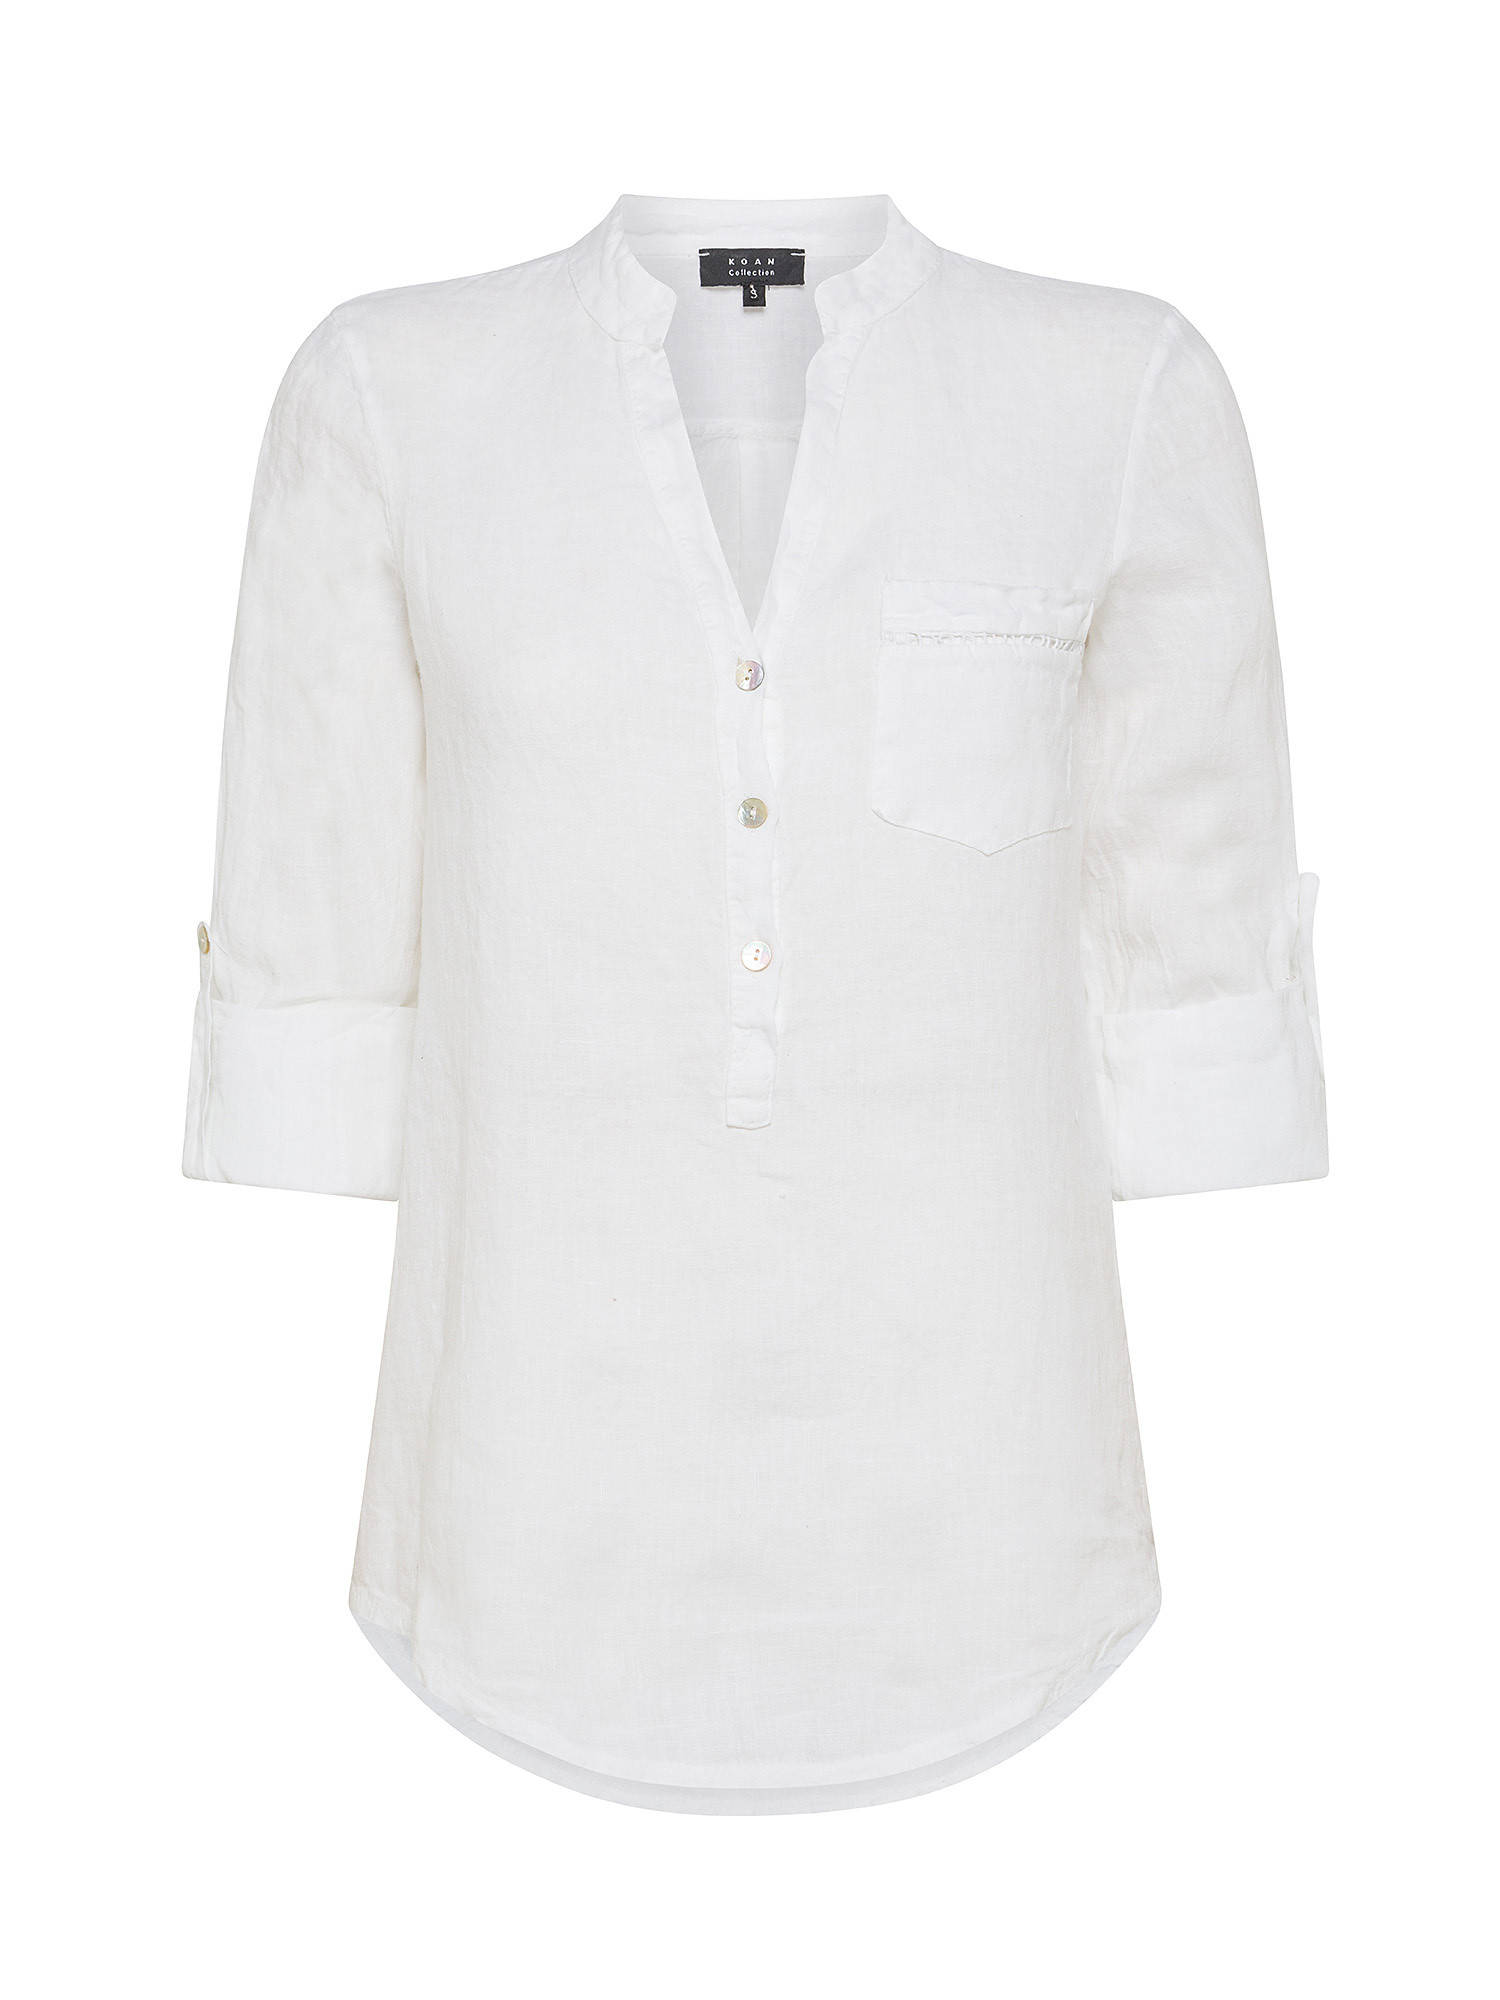 Koan - Linen blouse with pocket, White, large image number 0